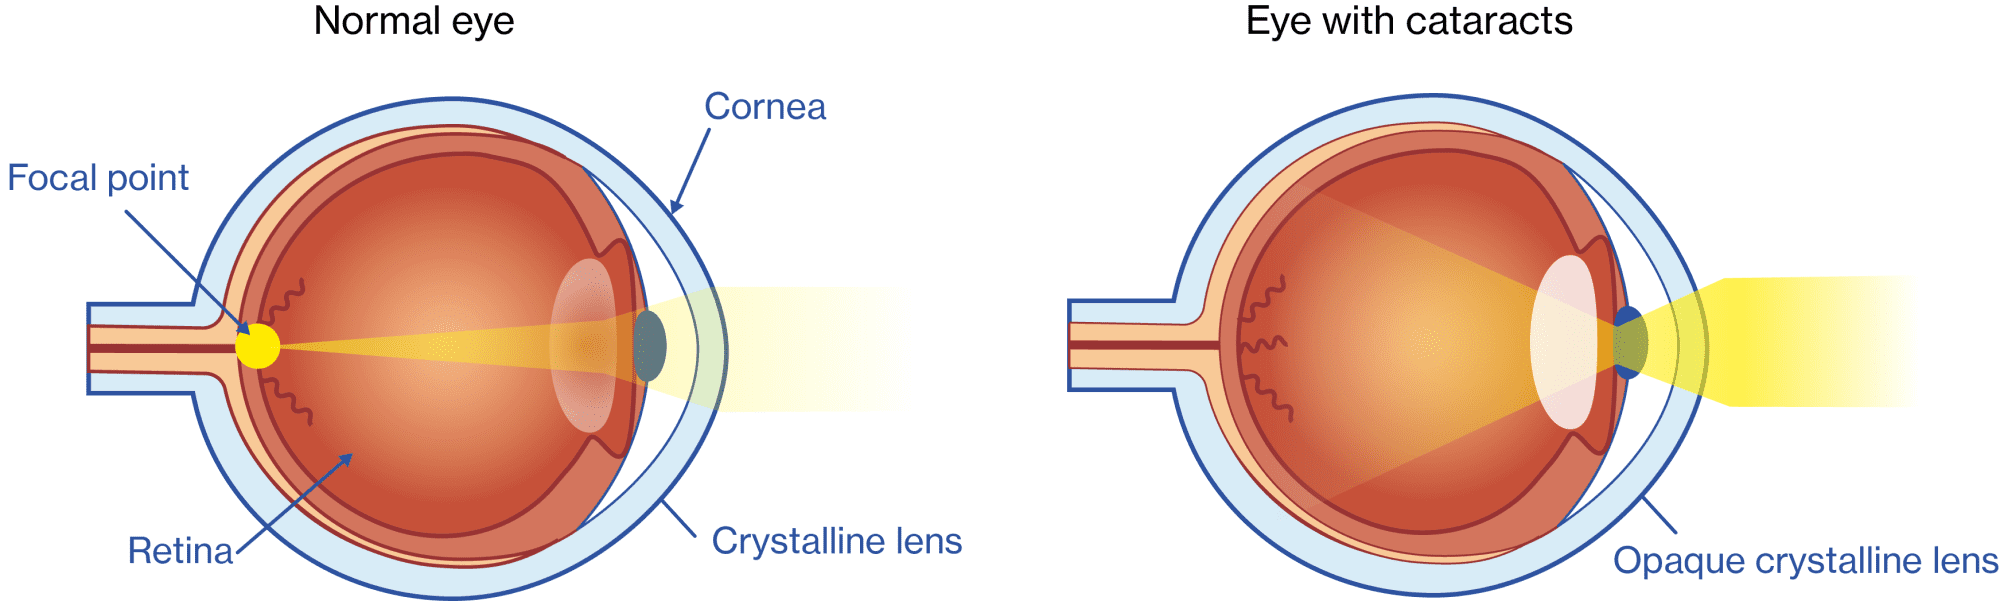 Normal eye without cataracts